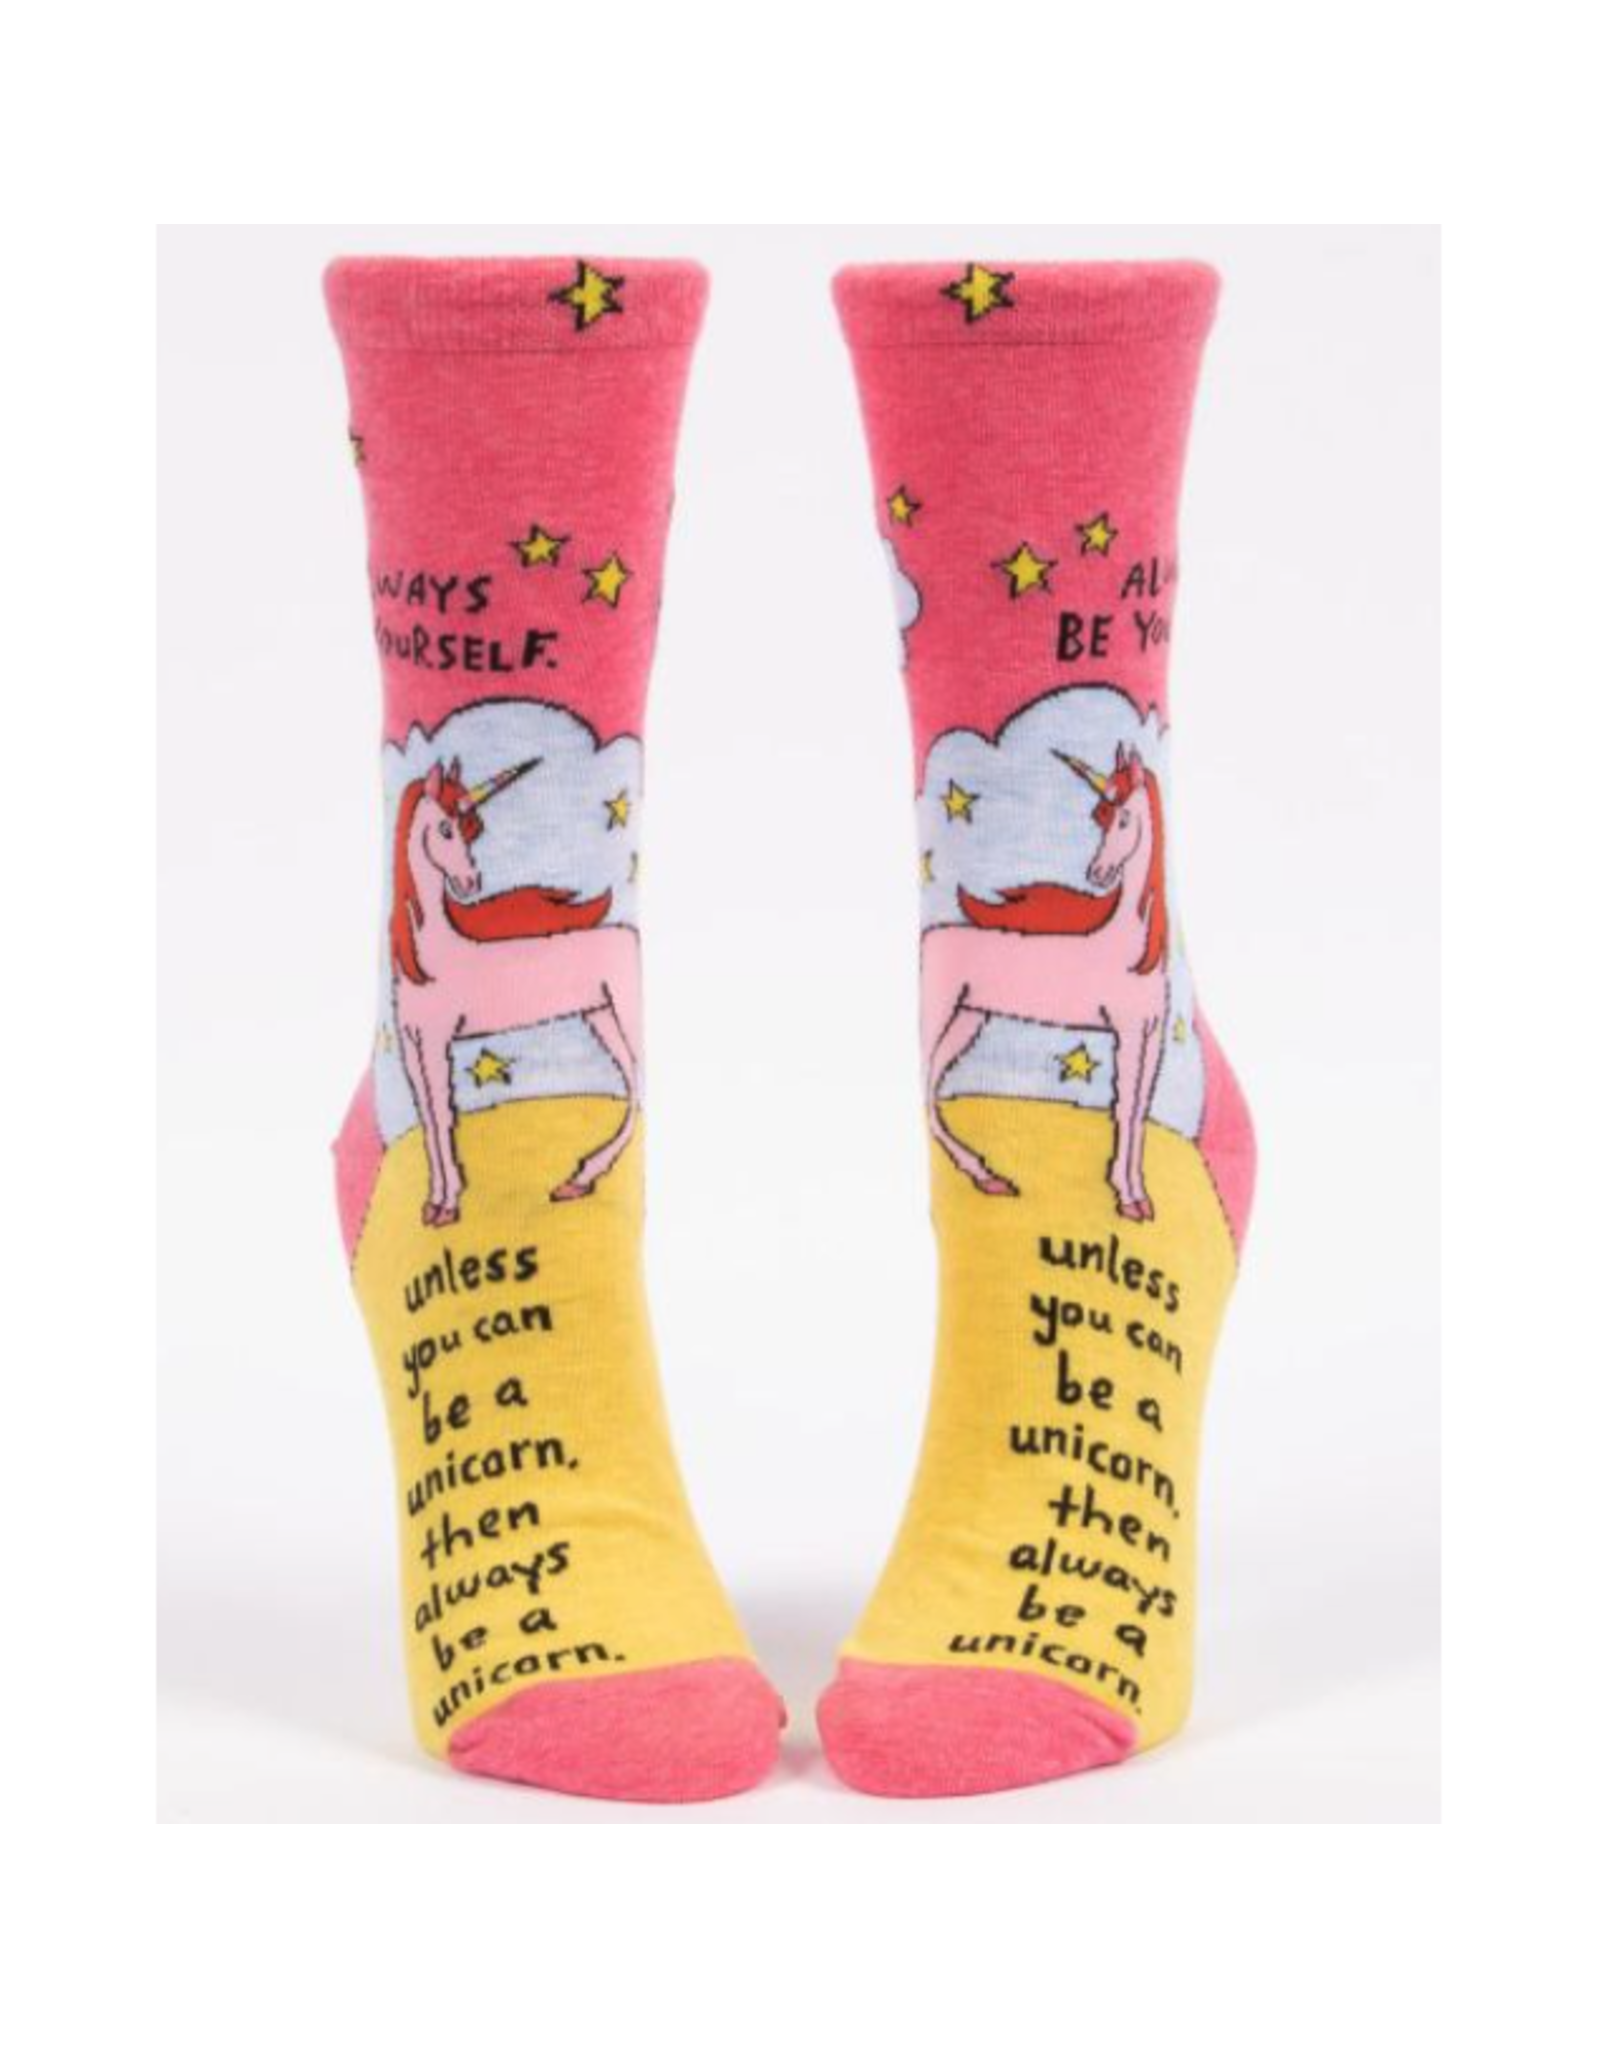 Blue Q Always Be Yourself Unless You Can Be a Unicorn Women's Crew Socks